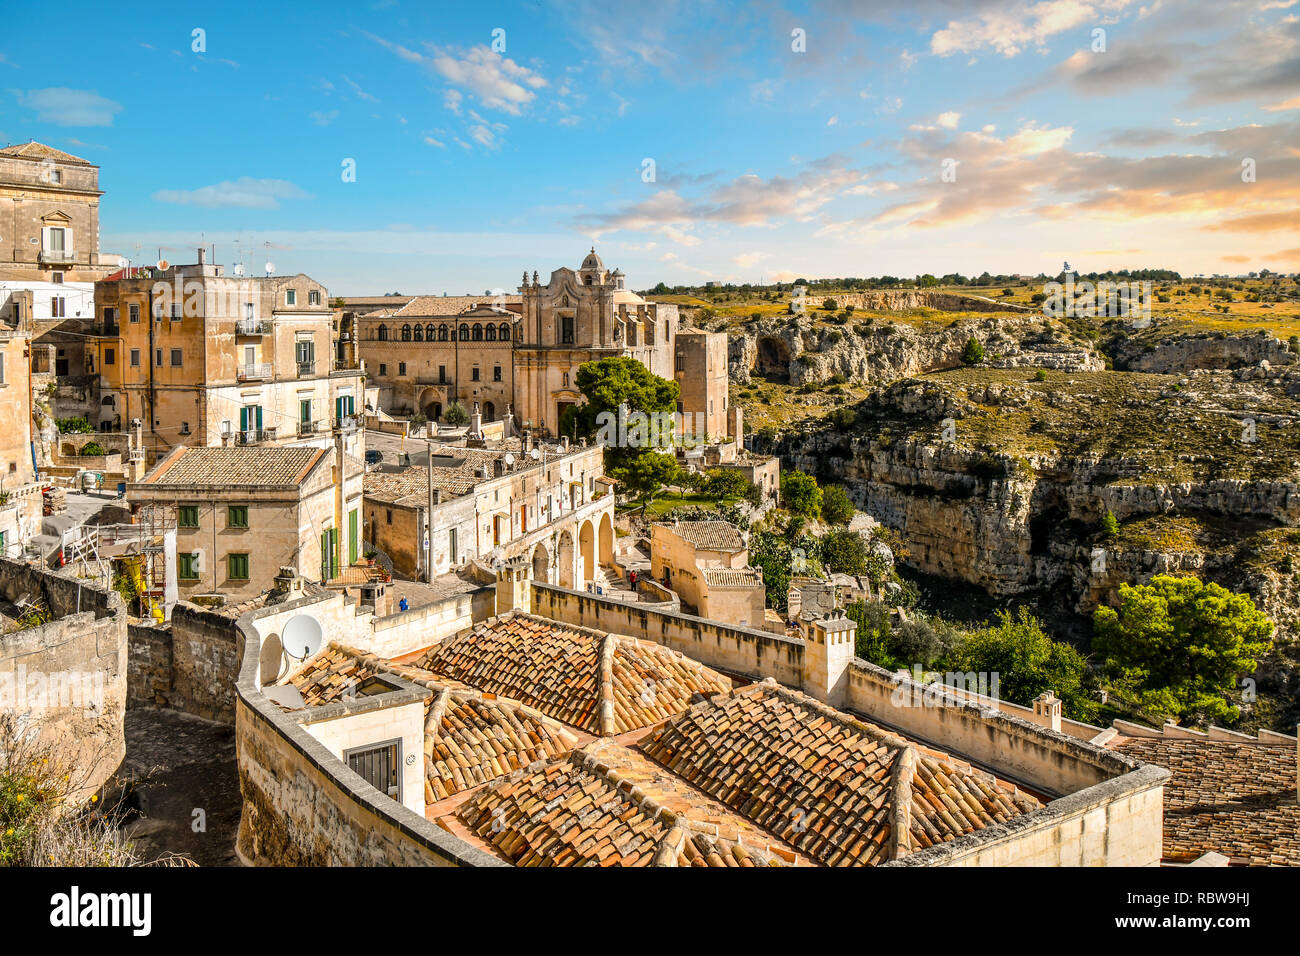 The Convent of Saint Agostino overlooks the canyon and the ancient sassi caves in the city of Matera, Italy. Stock Photo